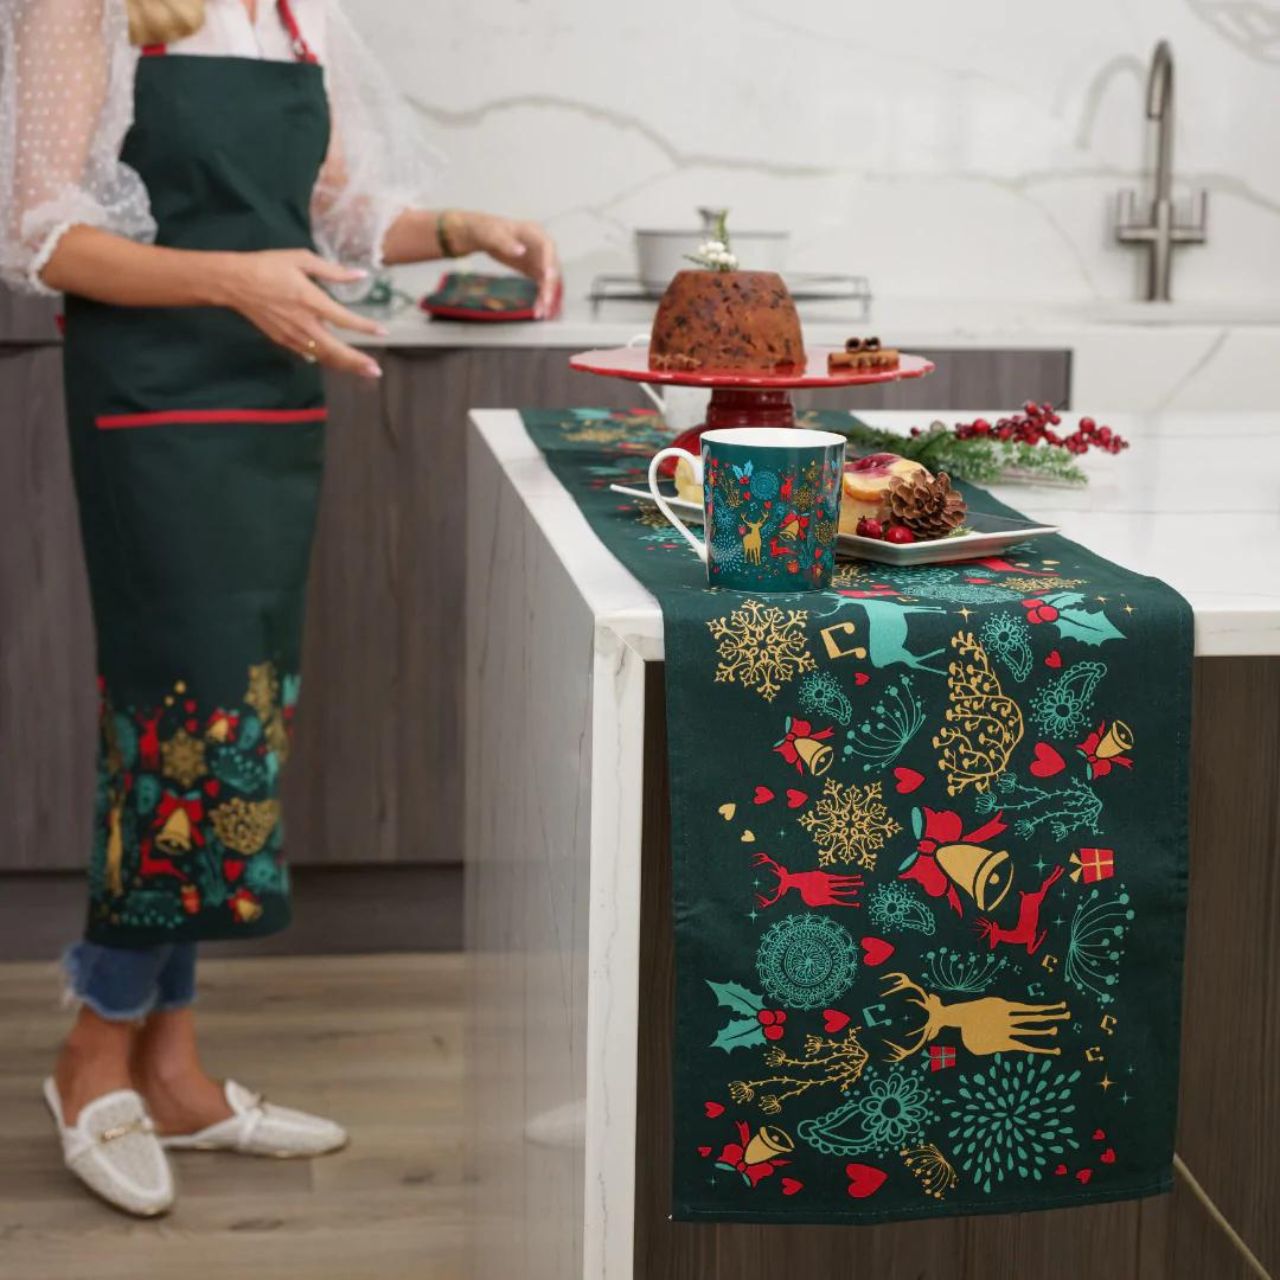 Christmas Wish Table Runner by Mindy Brownes Interiors  A beautiful table runner finished in forest green with a Christmas design that depicts some of Christmas' key elements, such as reindeer, presents, music notes, and more.  Ideal for any festive tablescape.